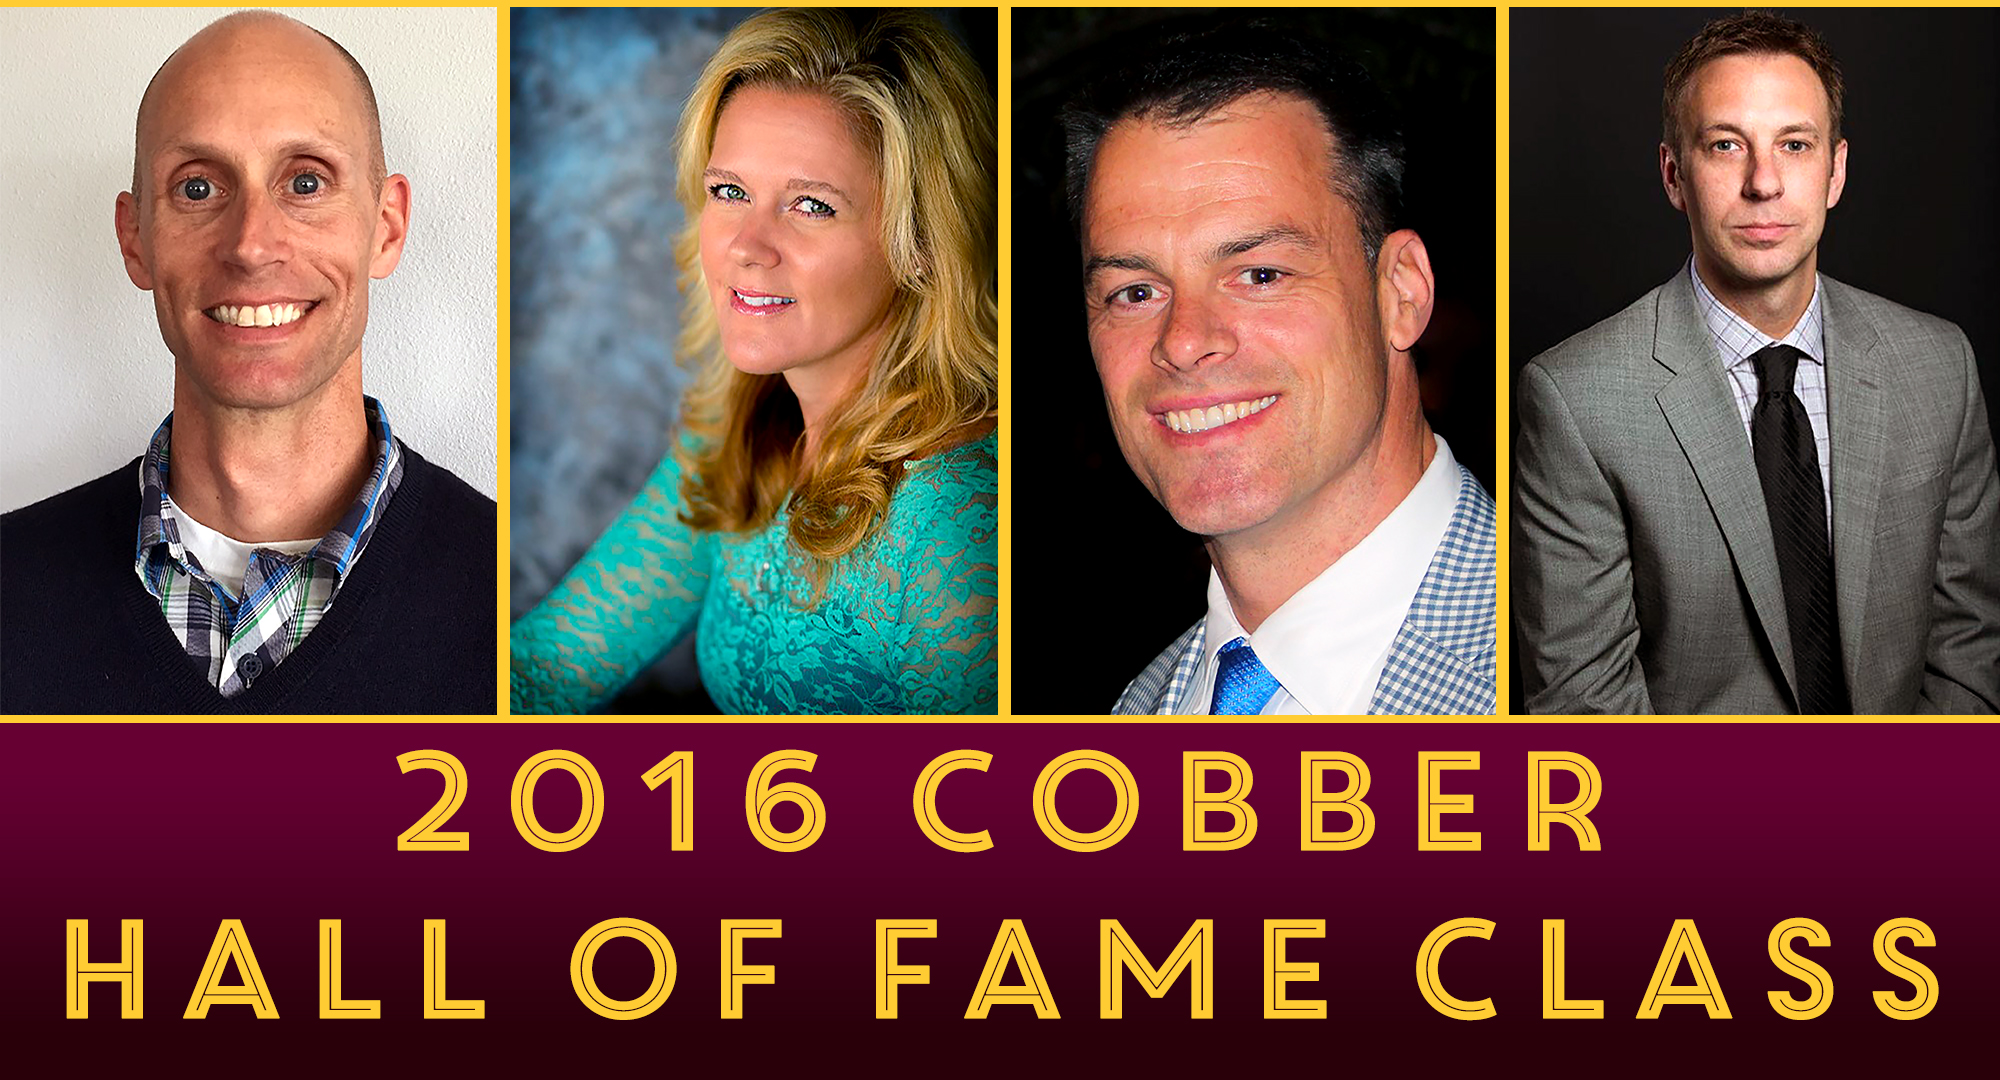 The 2016 Concordia Hall of Fame inductees are (L-R): Jason Trichler '93, Erica (Hanson) Reid '94, Marc Terris '94 and Todd Hashbarger '98.